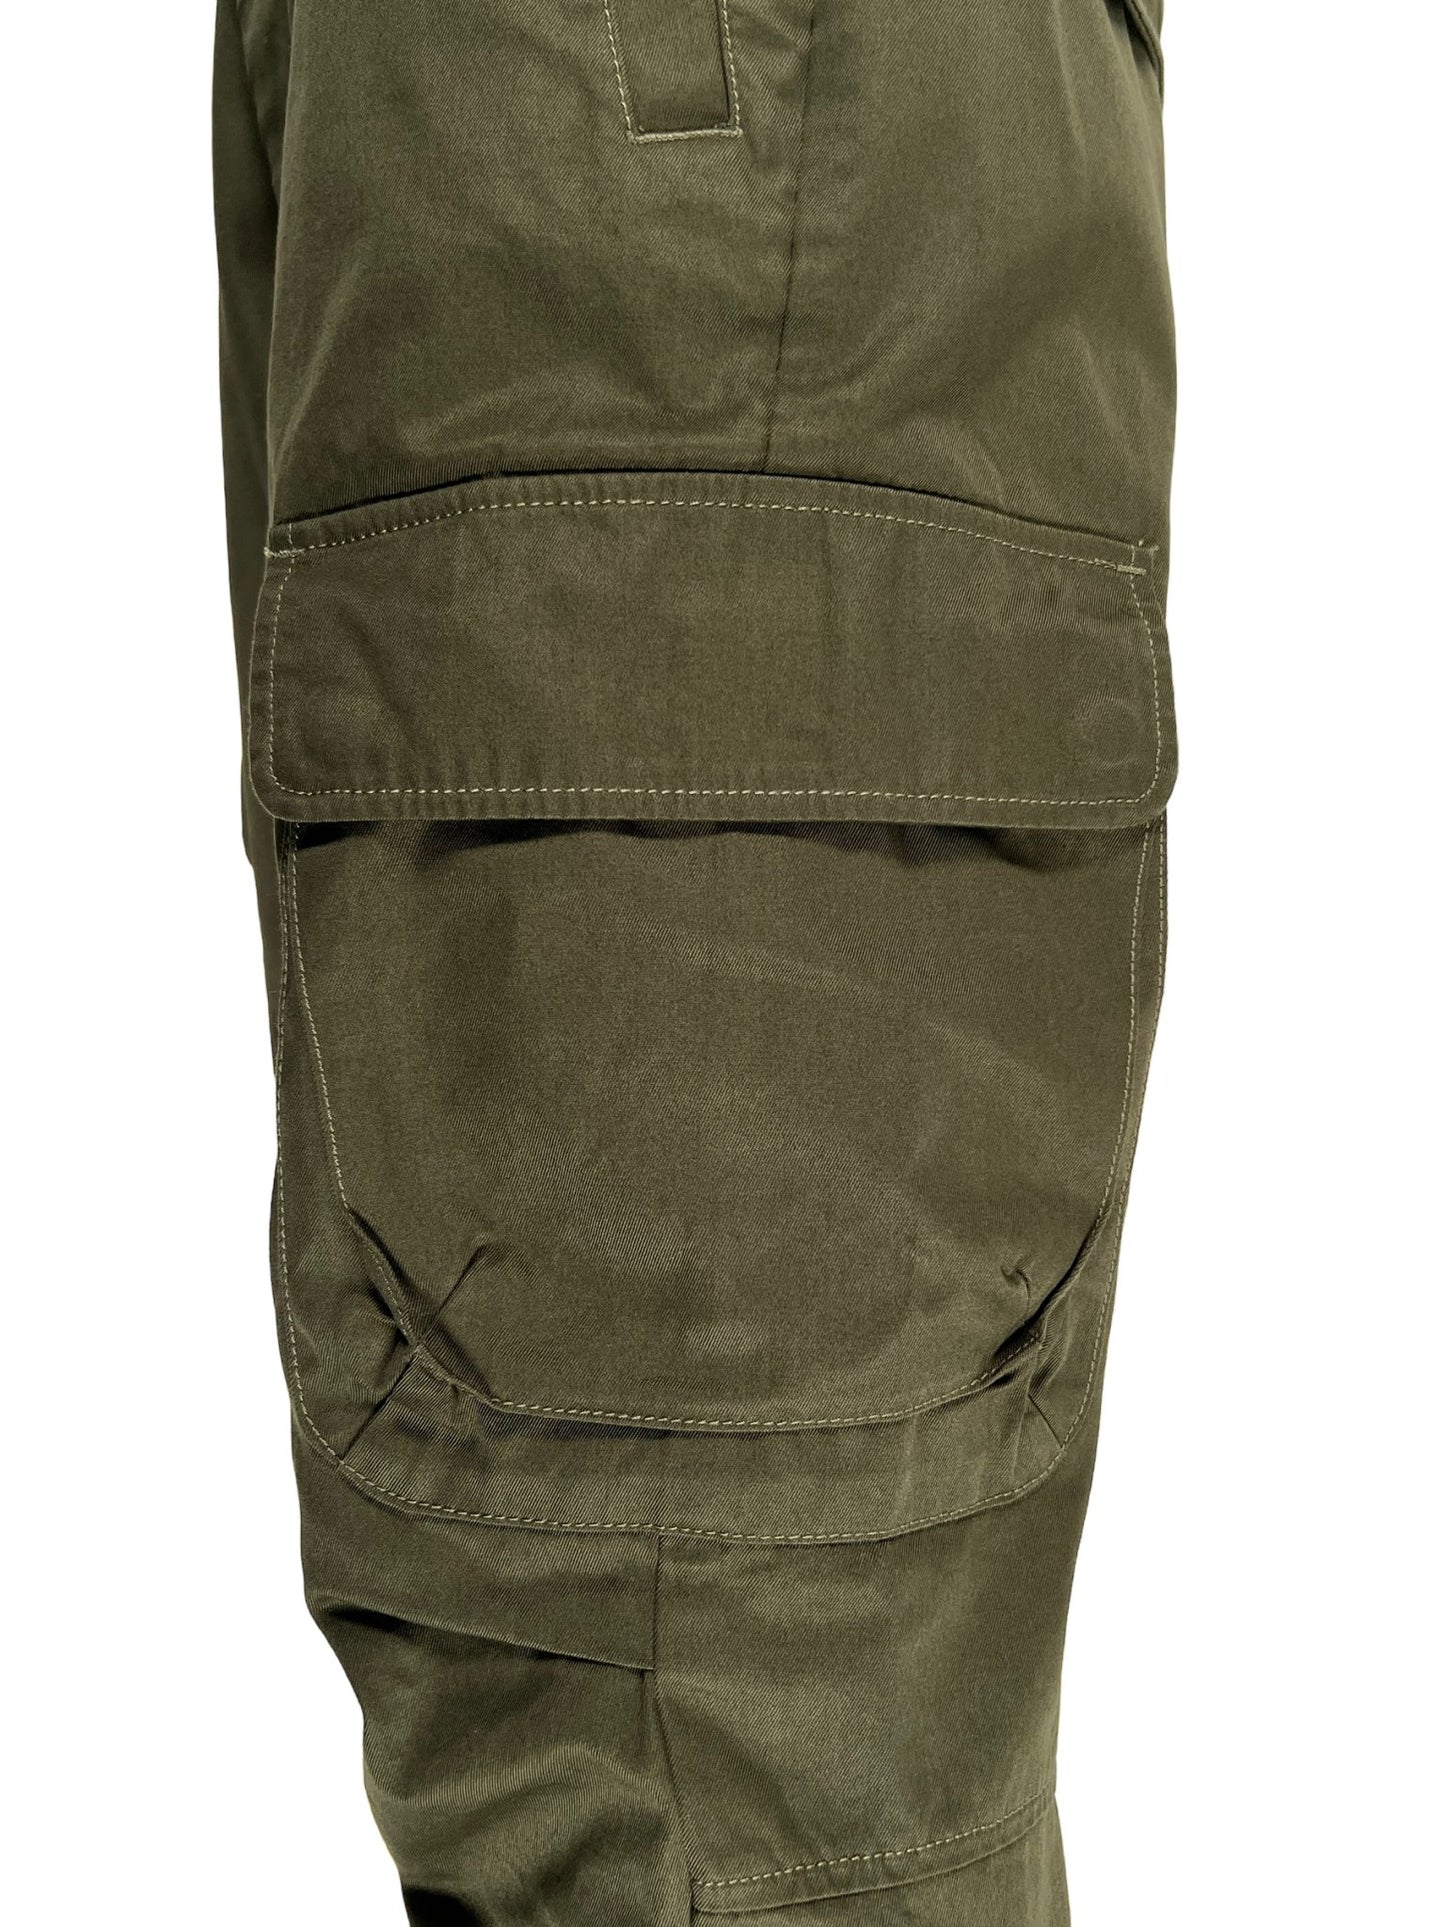 A pair of DIESEL P-ARGYM pants in olive green with cargo pockets.